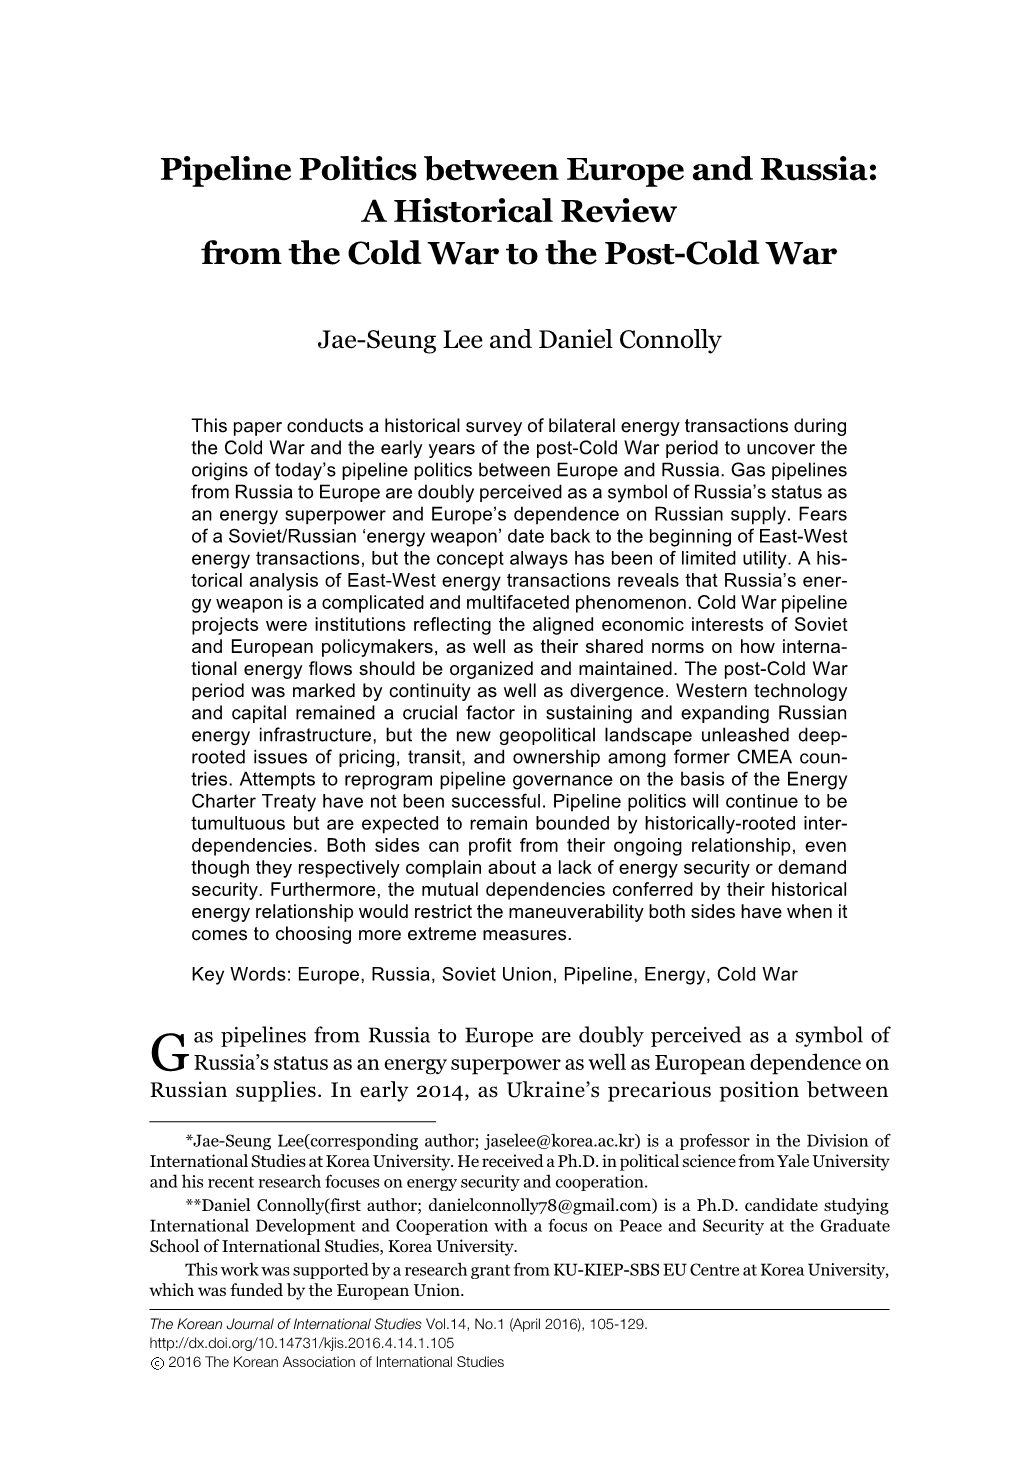 Pipeline Politics Between Europe and Russia: a Historical Review from the Cold War to the Post-Cold War